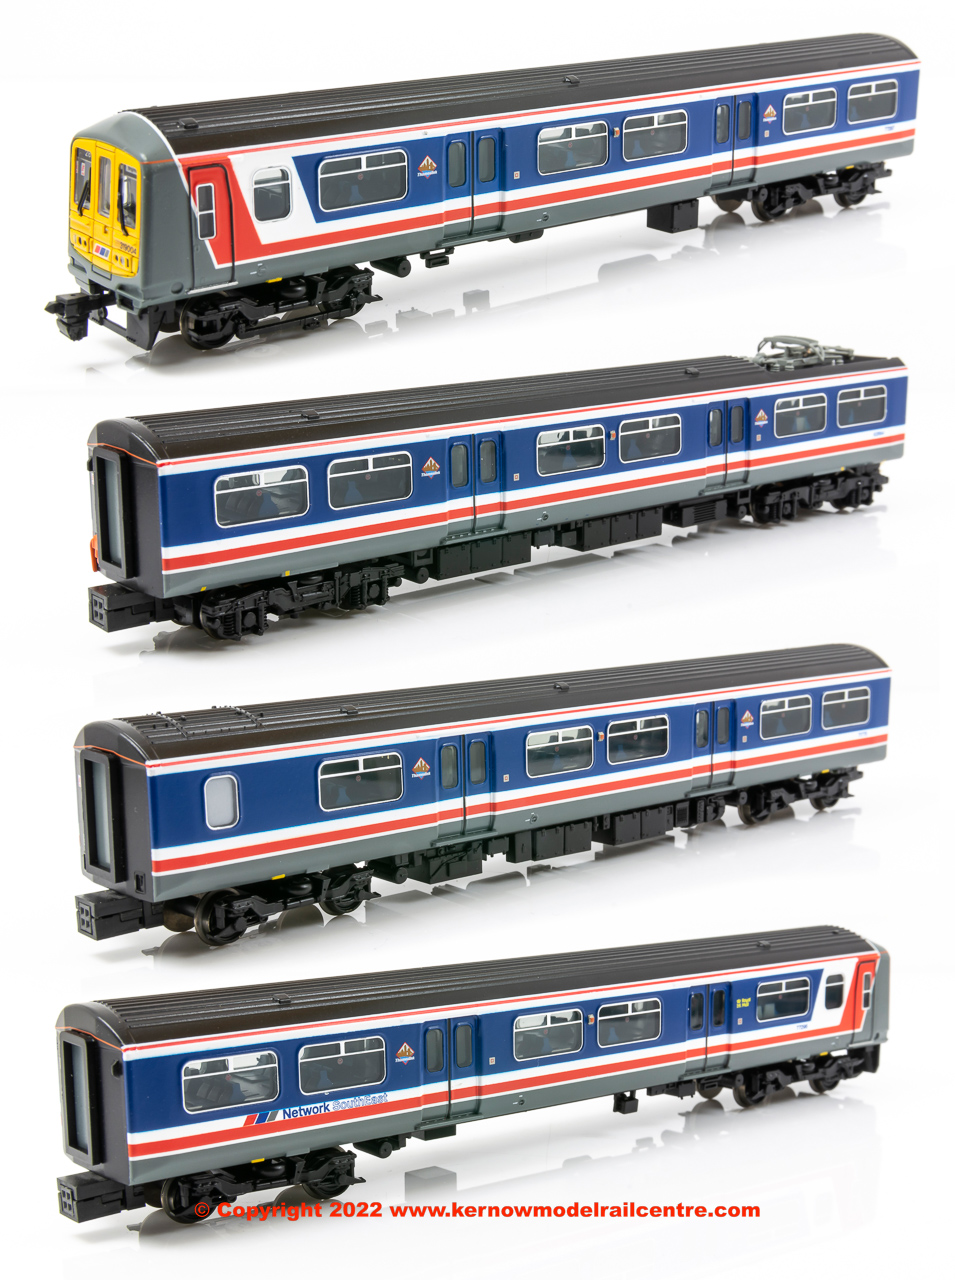 372-875 Graham Farish Class 319/0 4 Car EMU Set number 319 004 in Network SouthEast livery